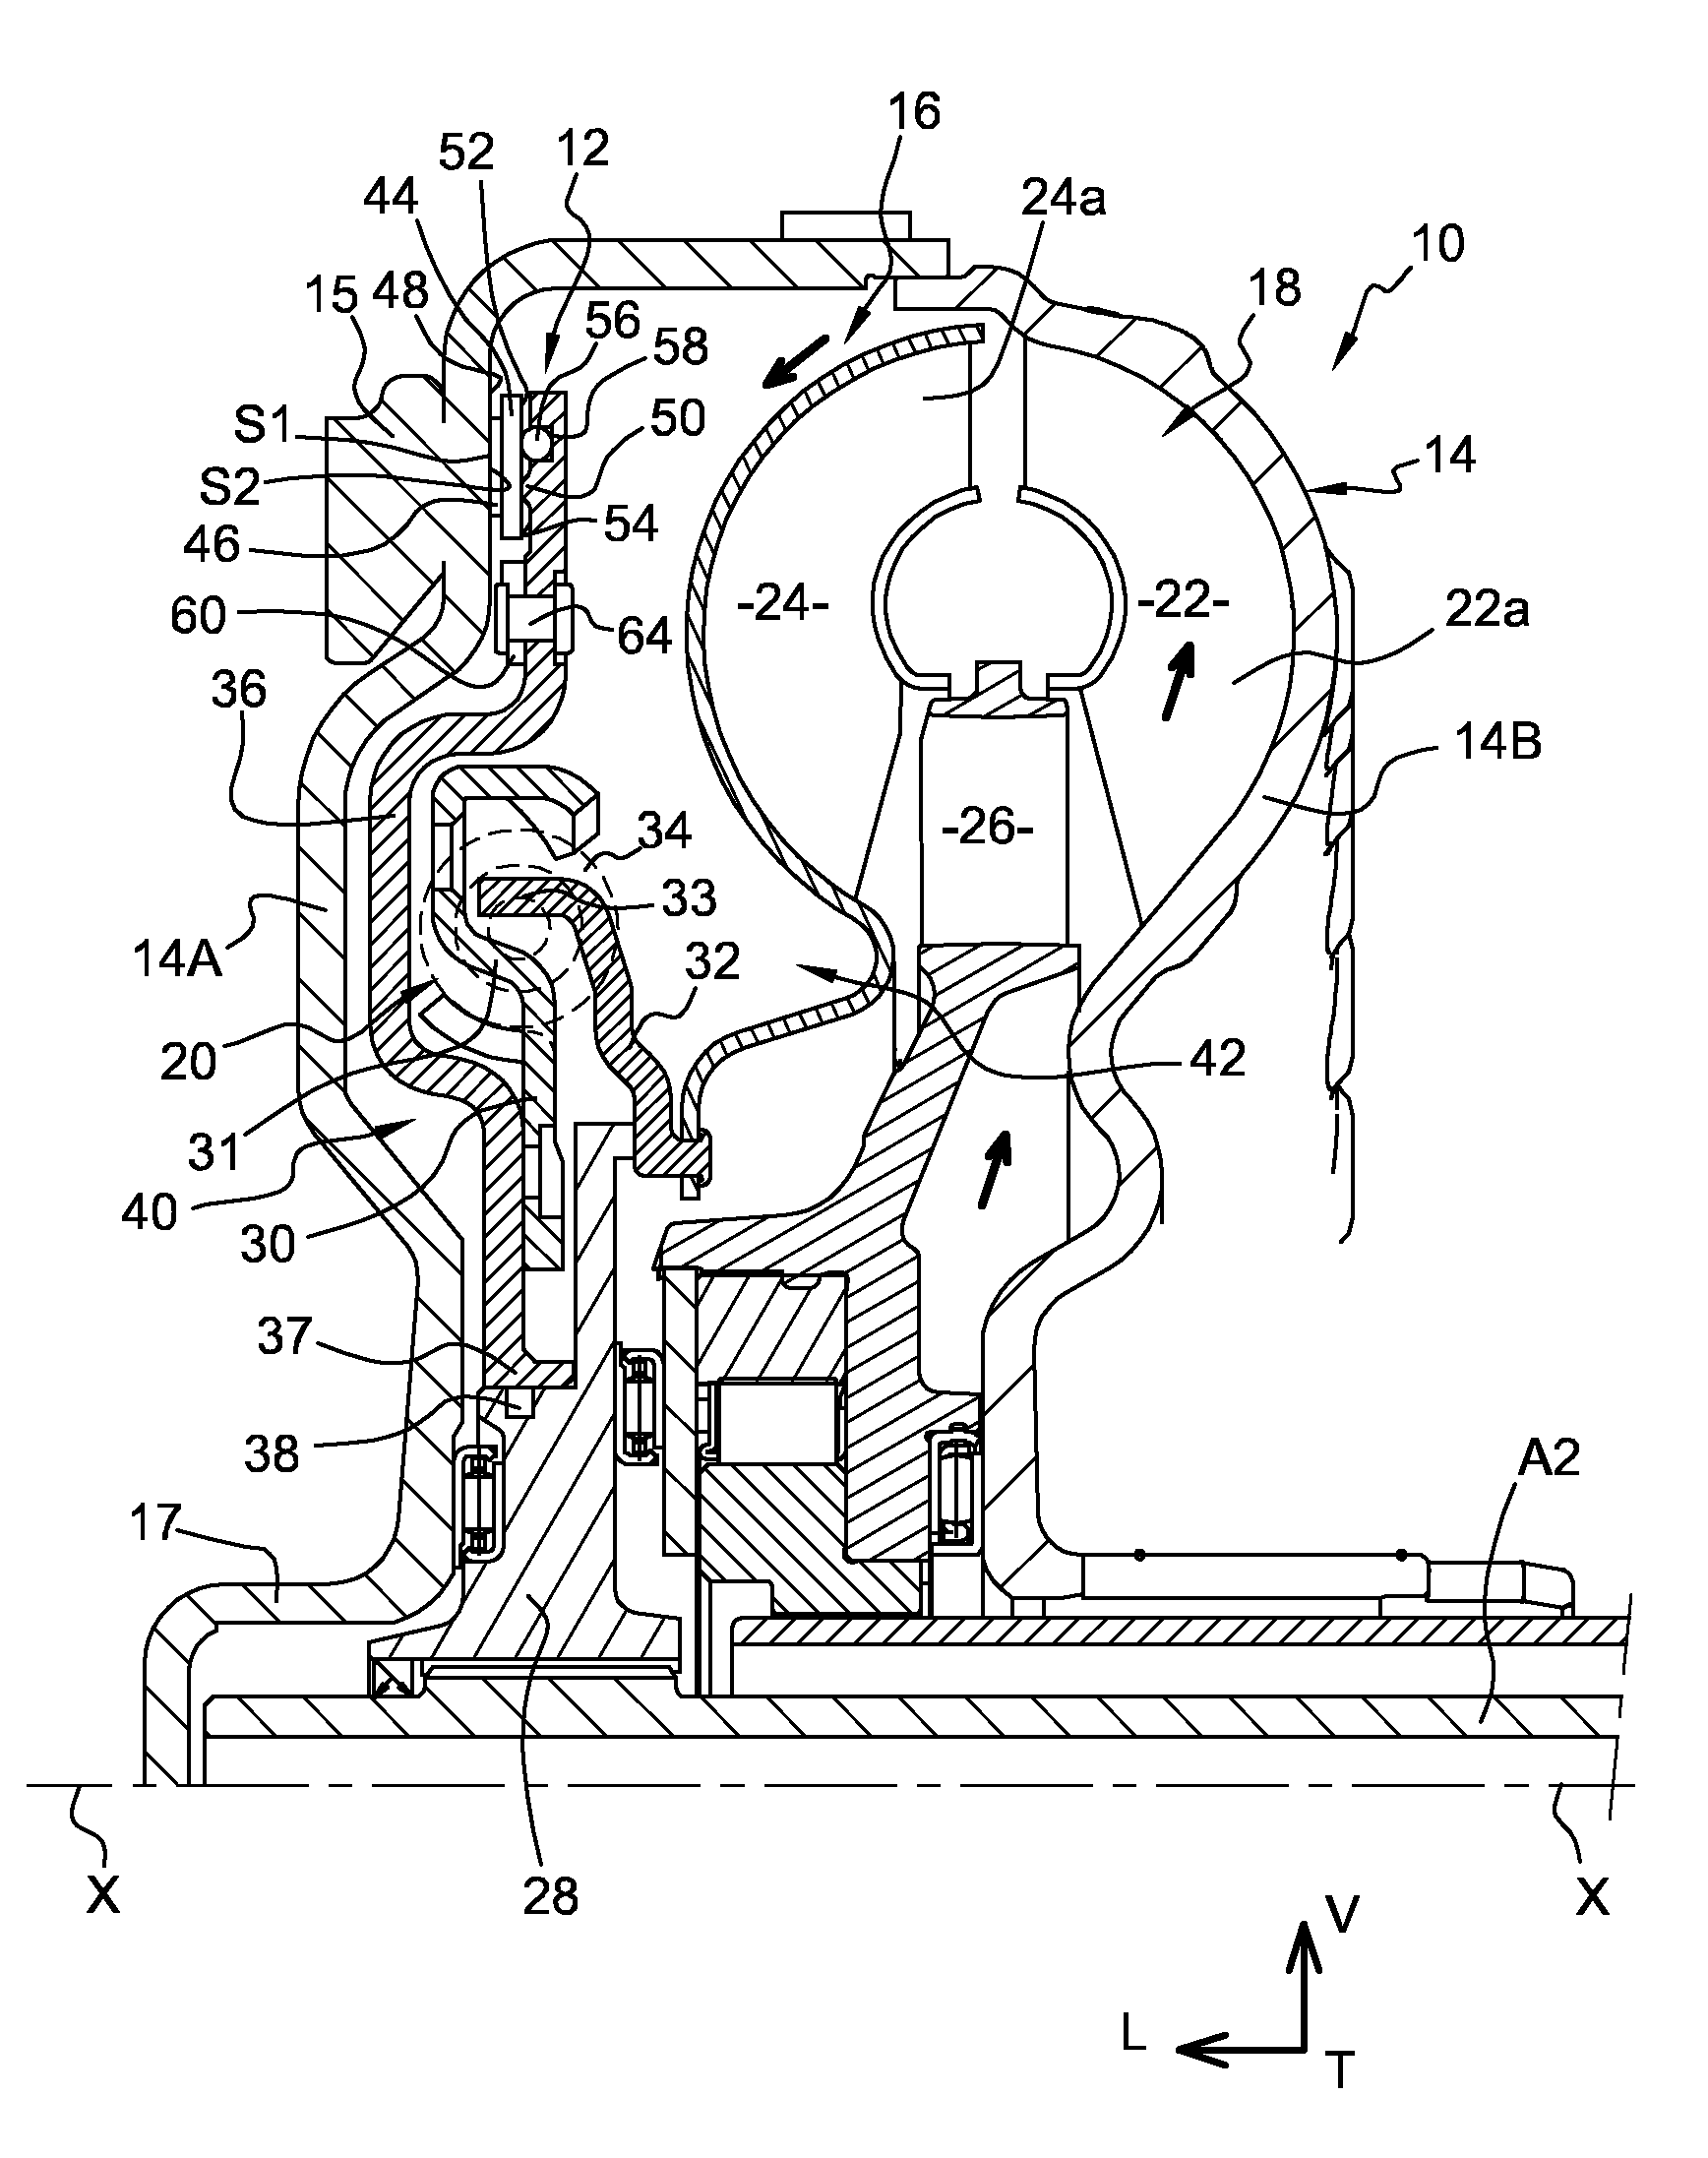 Lock-up clutch for hydrokinetic coupling device including improved connection means